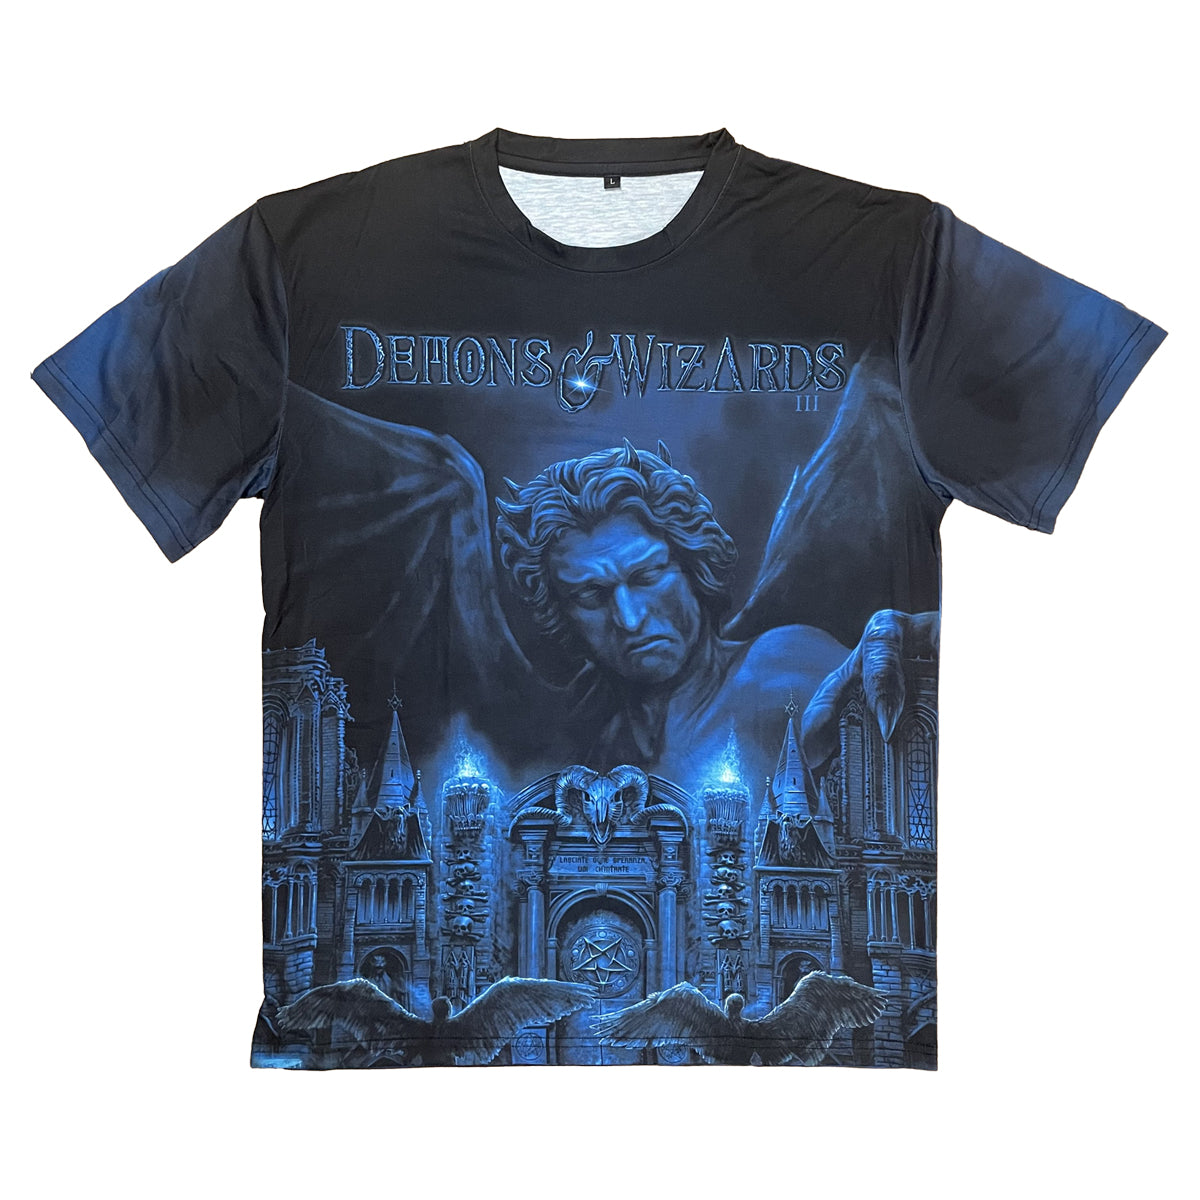 DEMONS & WIZARDS Demons & Wizards III Sublimated Multicolor T-Shirt